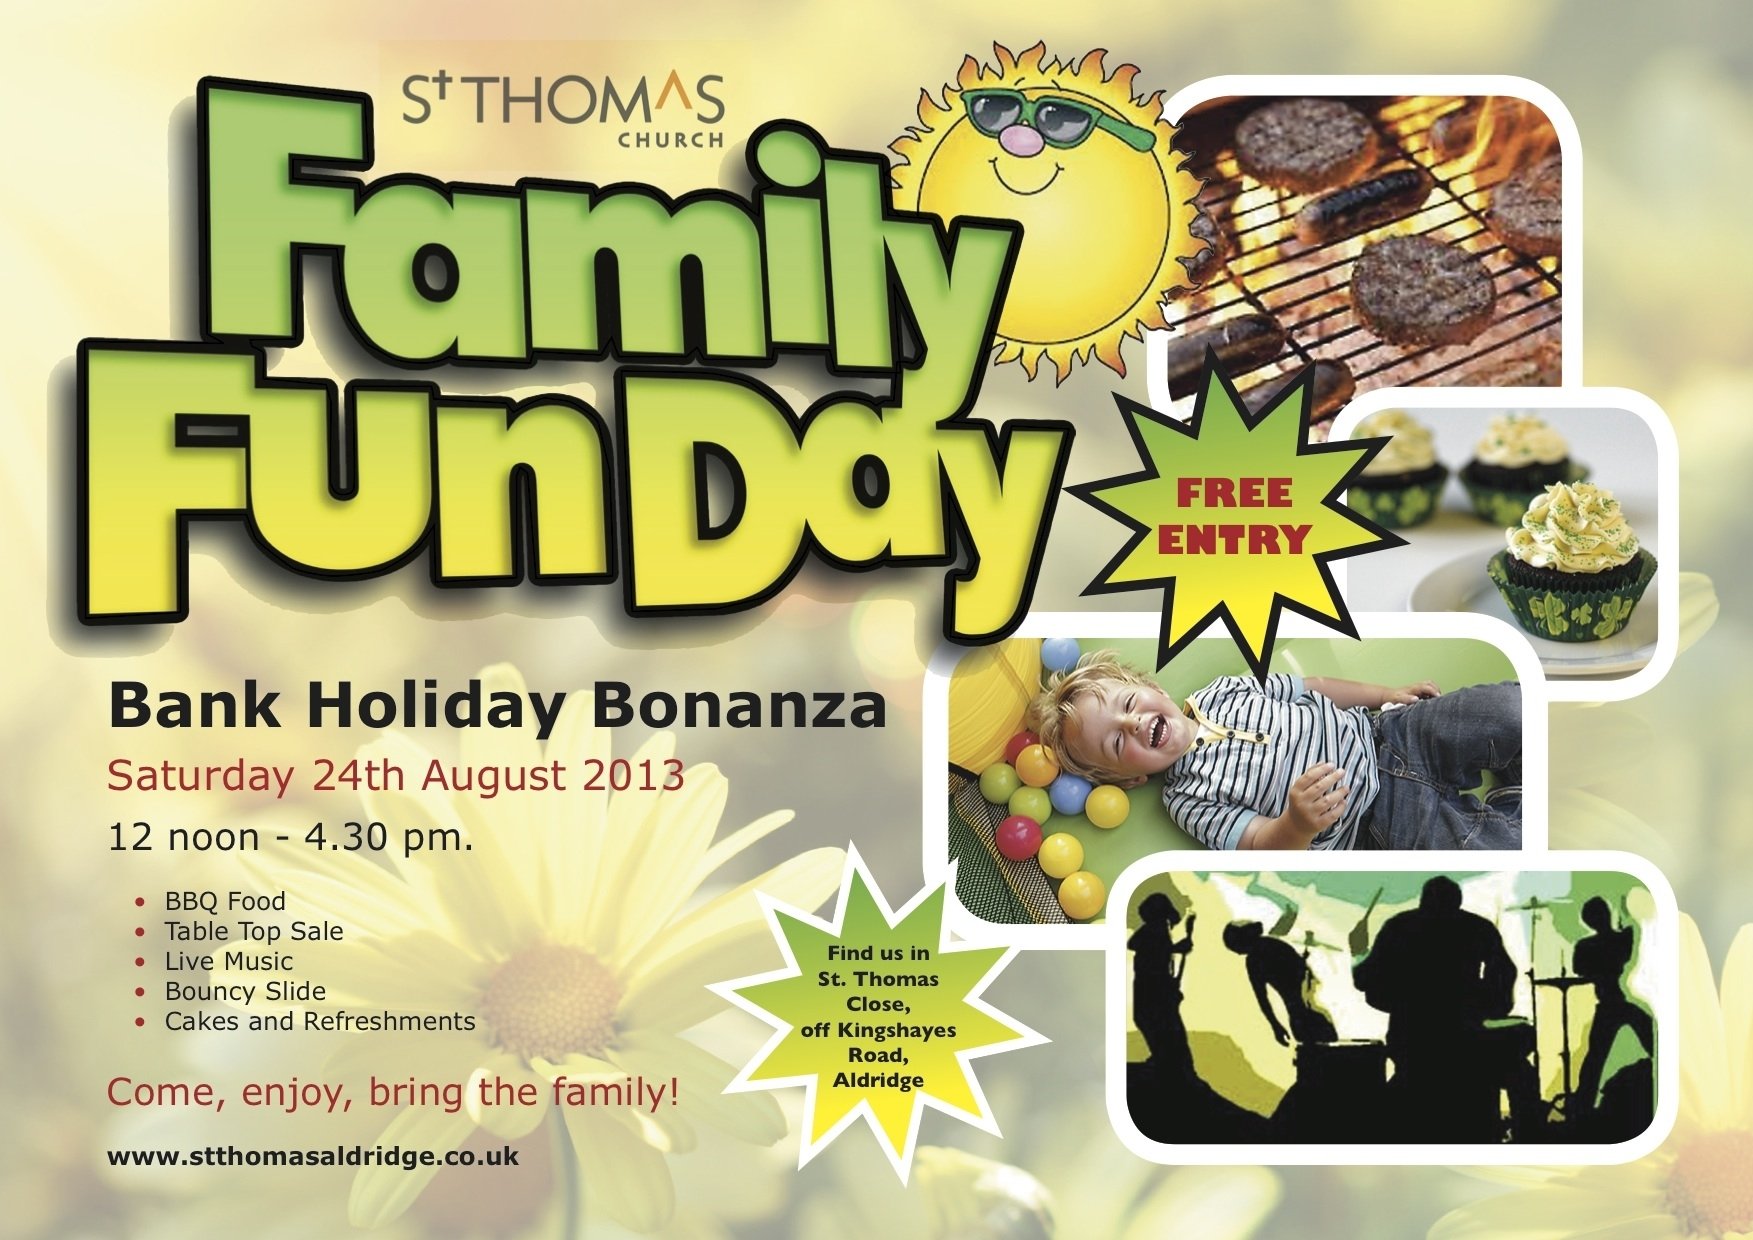 10 Fabulous Ideas For Family And Friends Day At Church another family fun day this saturday brownhillsbobs brownhills 2022